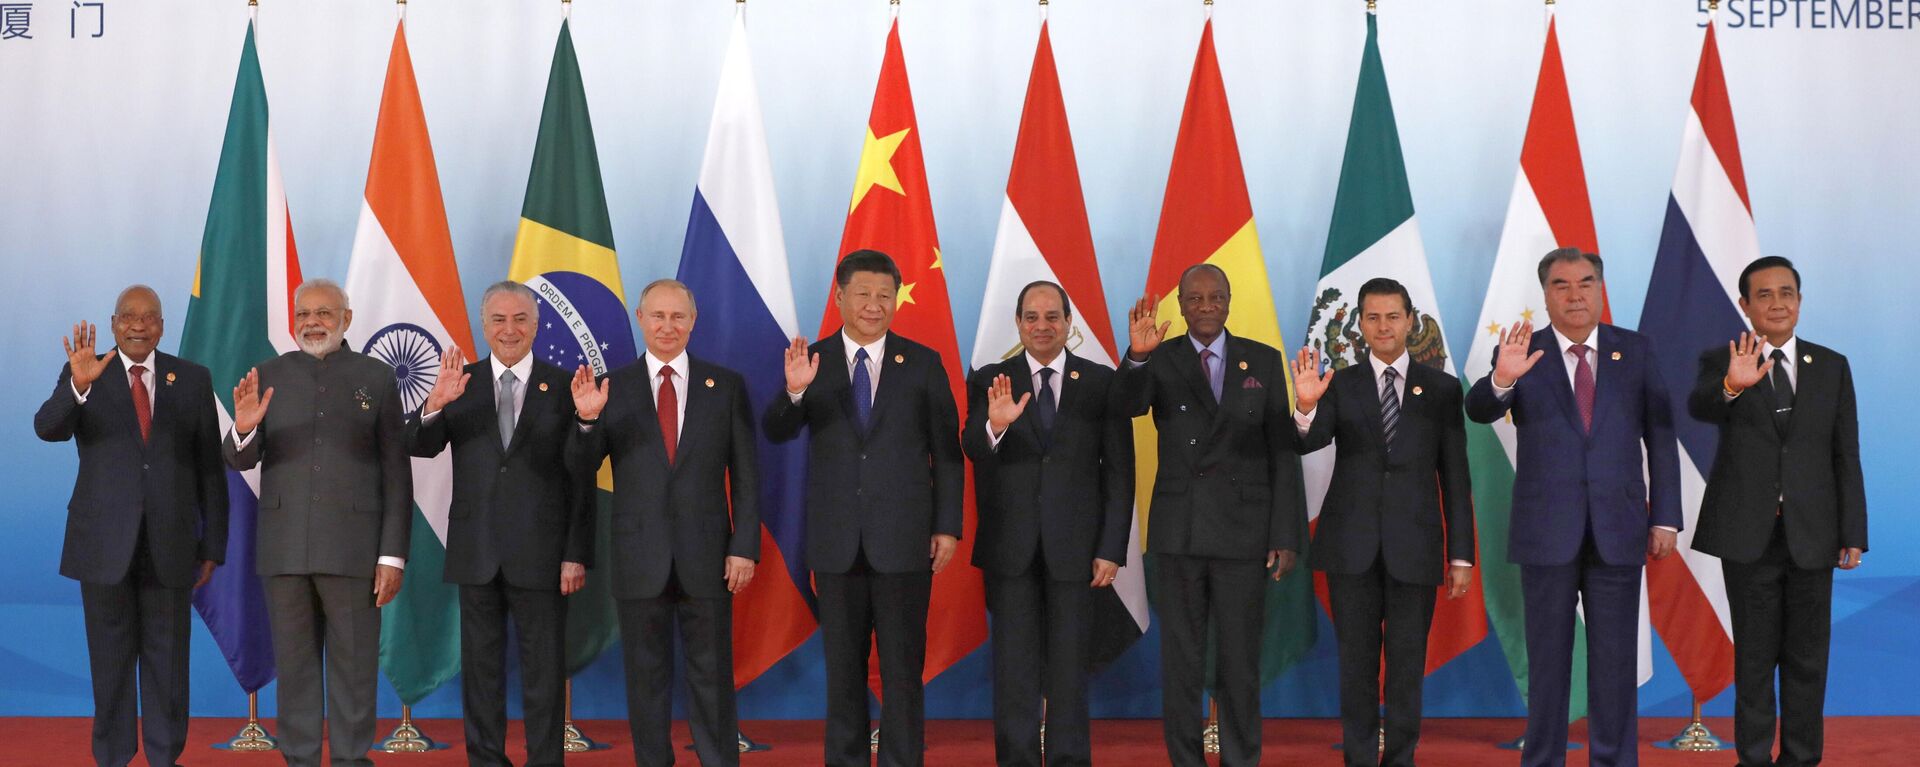 Leaders from left to right, South Africa's President Jacob Zuma, Indian Prime Minister Narendra Modi, Brazilian President Michel Temer, Russian President Vladimir Putin, Chinese President Xi Jinping, Egypt's President Abdel-Fattah el-Sissi, Guinea's President Alpha Conde, Mexico's President Enrique Pena Nieto, Tajikistan's President Emomali Rahmon and Thai Prime Minister Prayuth Chan-ocha pose for group photo ahead of the Emerging Market and Developing Countries meeting at the BRICS Summit, in Xiamen, China, Tuesday, Sept. 5, 2017. - Sputnik Africa, 1920, 22.05.2024